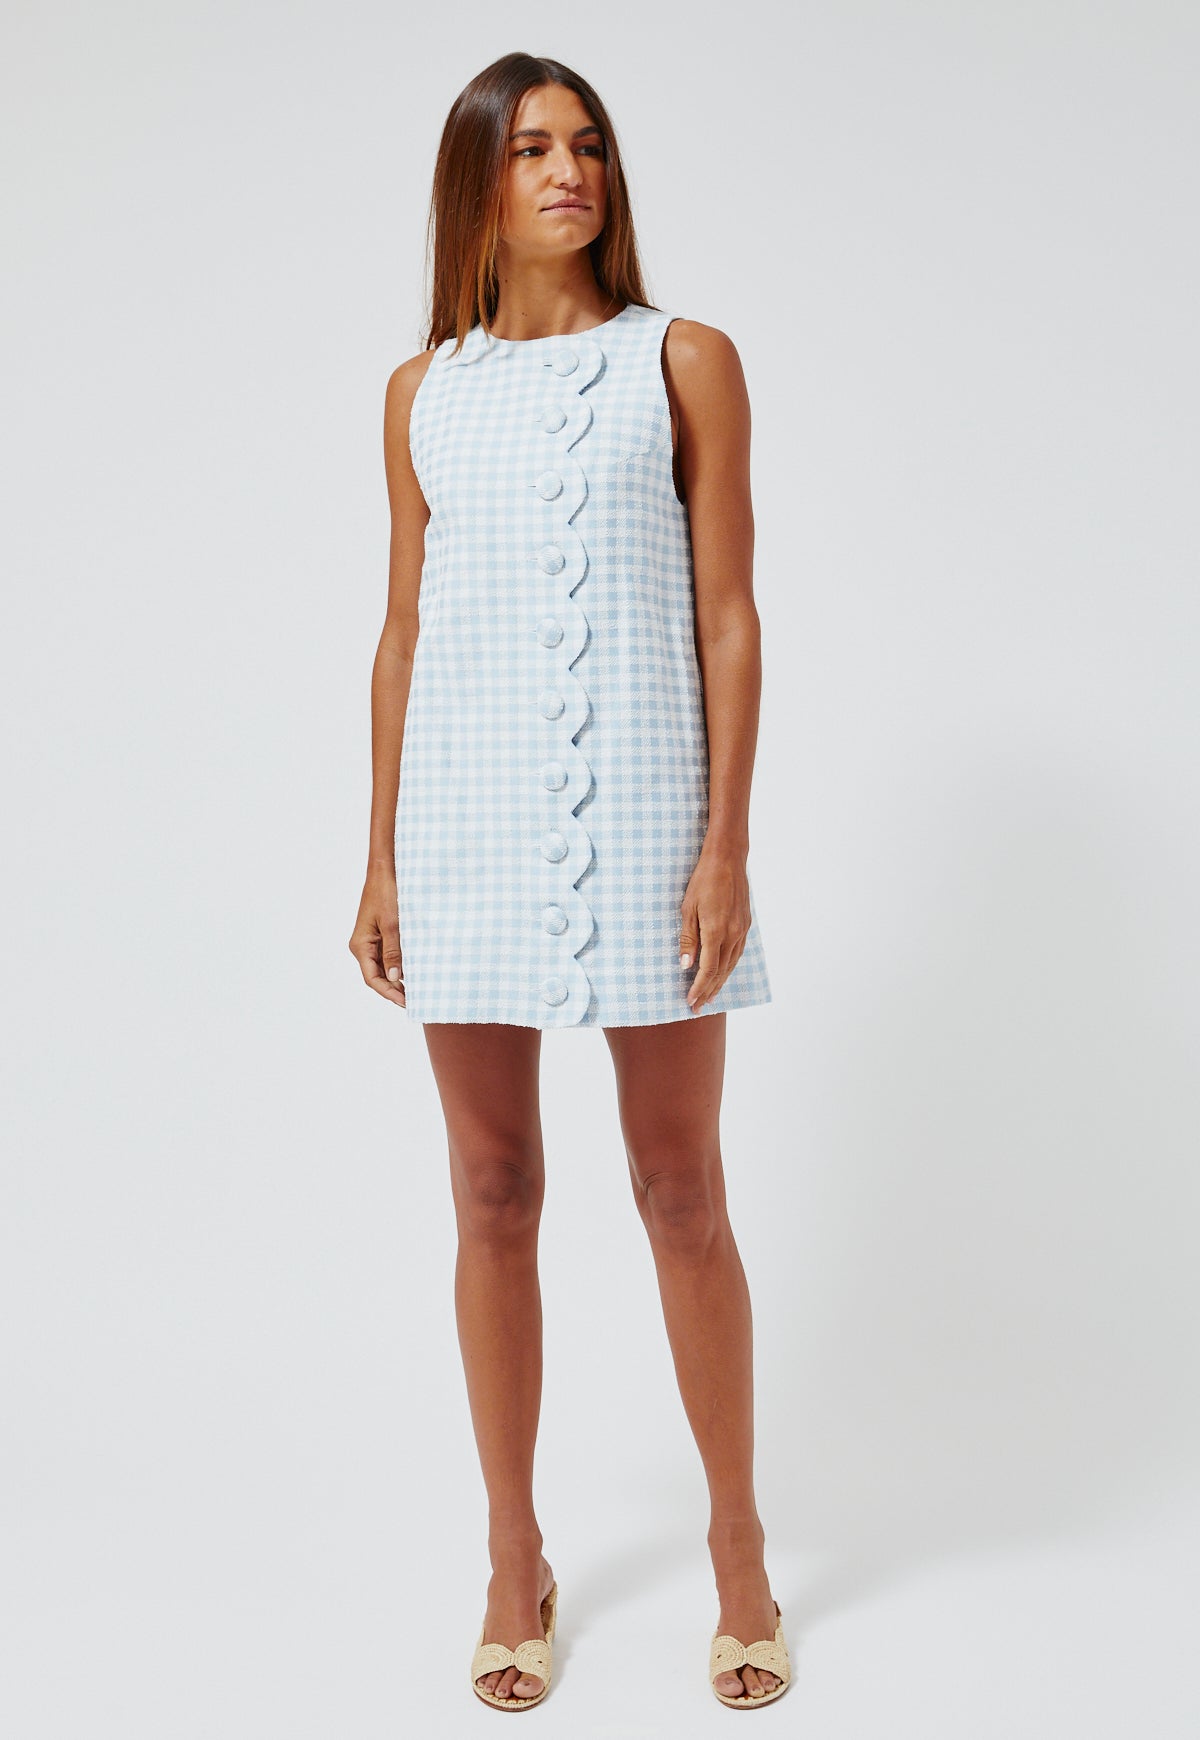 THE SCALLOP MINI DRESS in BLUE GINGHAM BOUCLE COTTON